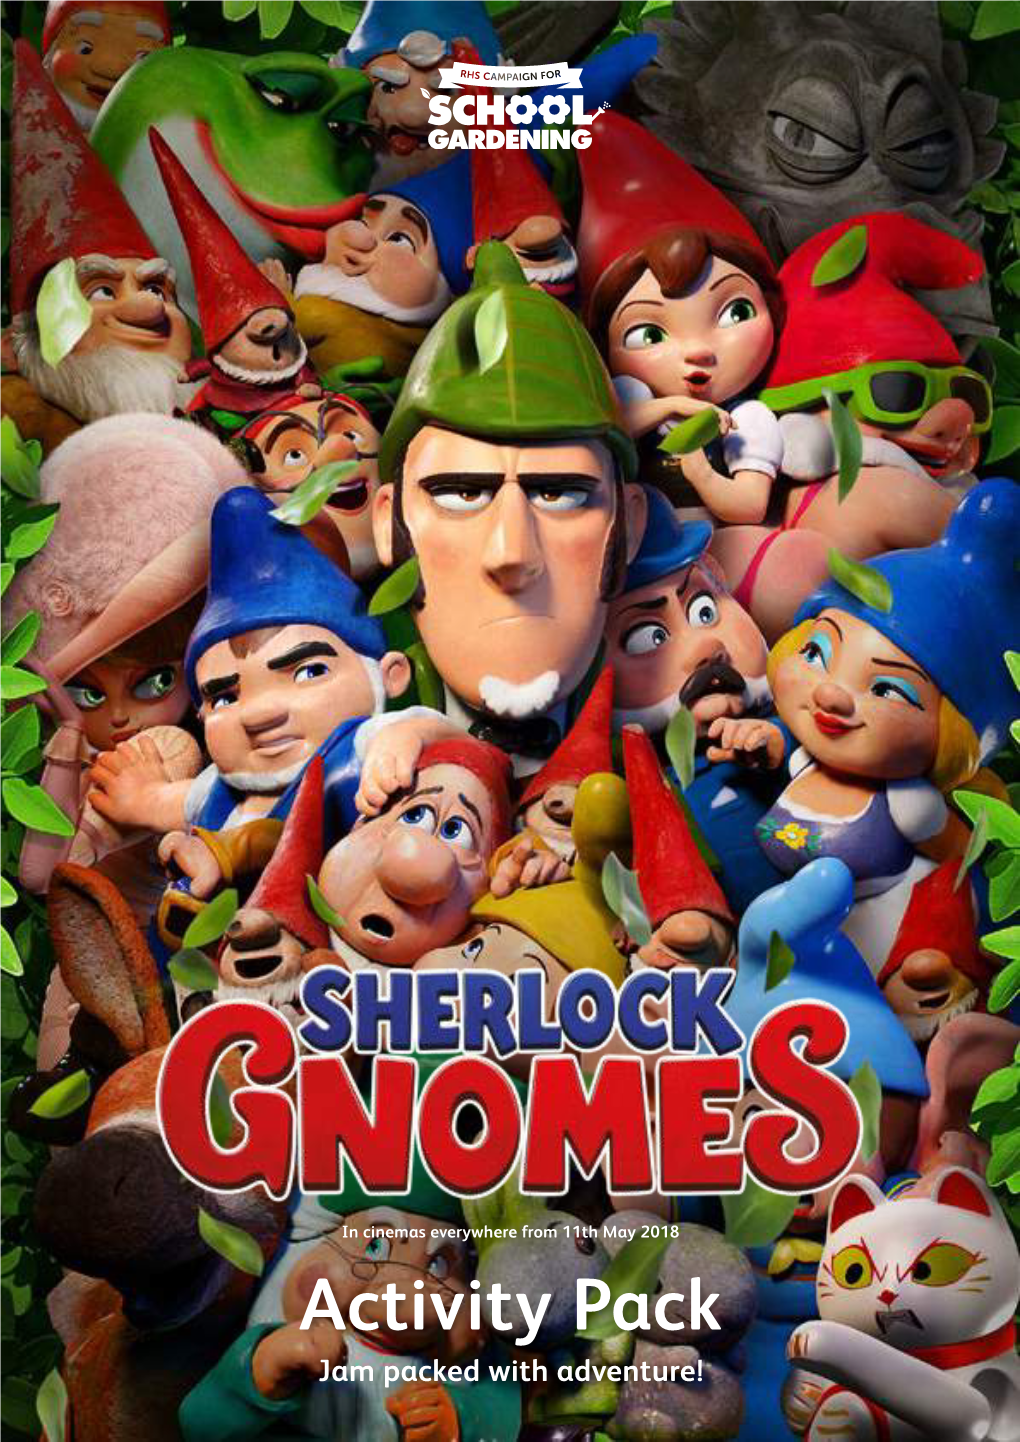 Activity Pack Jam Packed with Adventure! Welcome to Your Sherlock Gnomes Activity Pack!